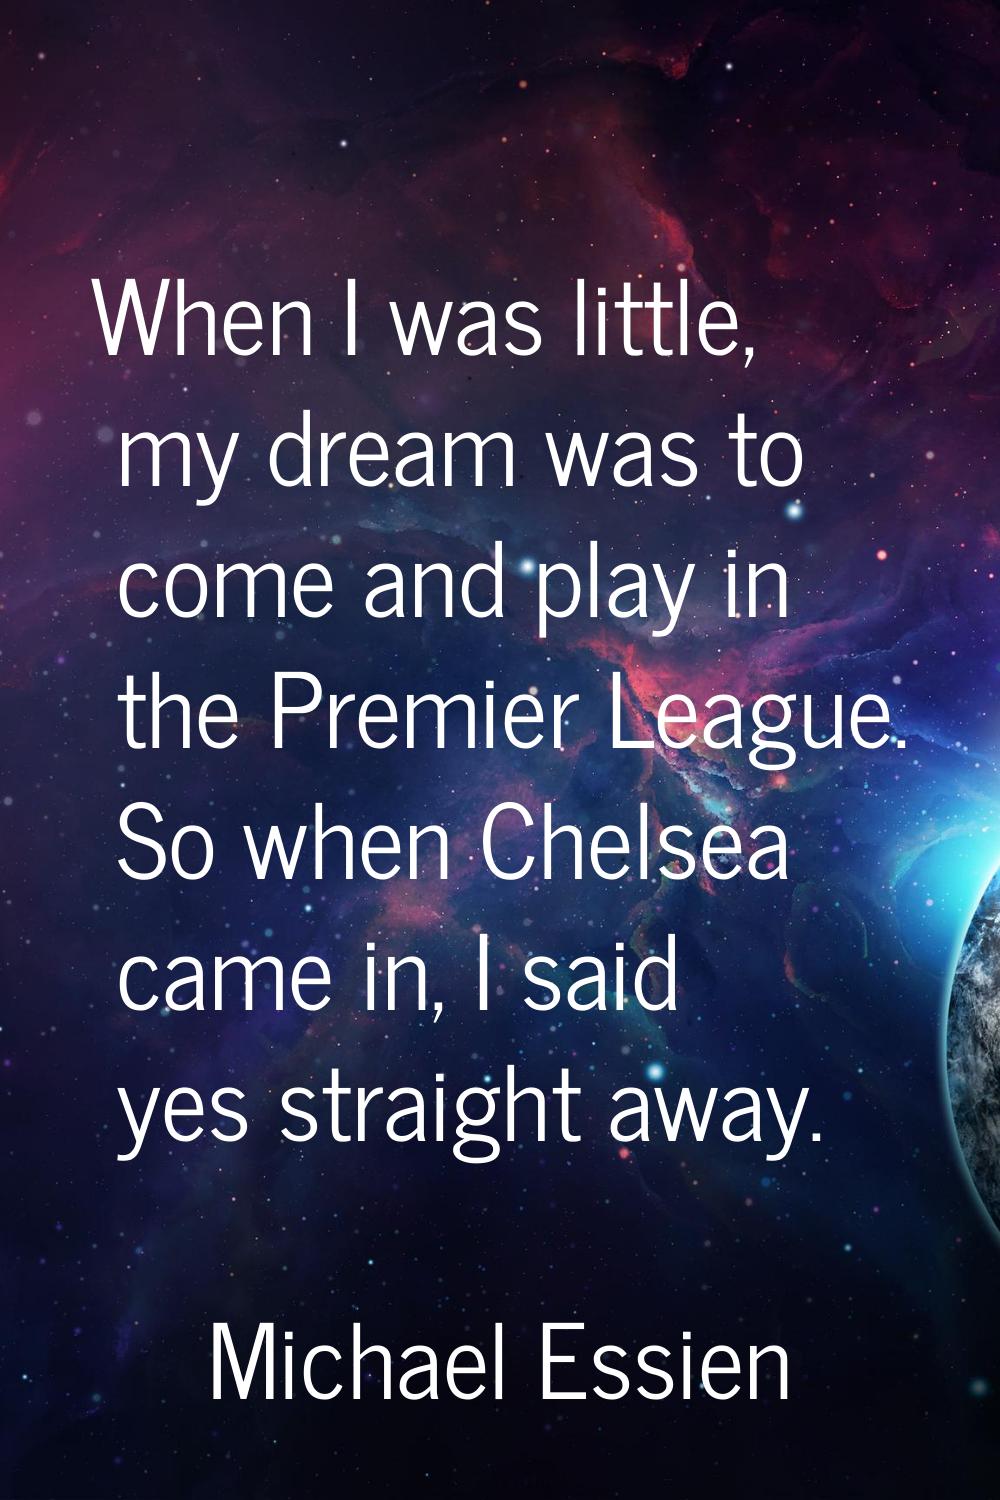 When I was little, my dream was to come and play in the Premier League. So when Chelsea came in, I 